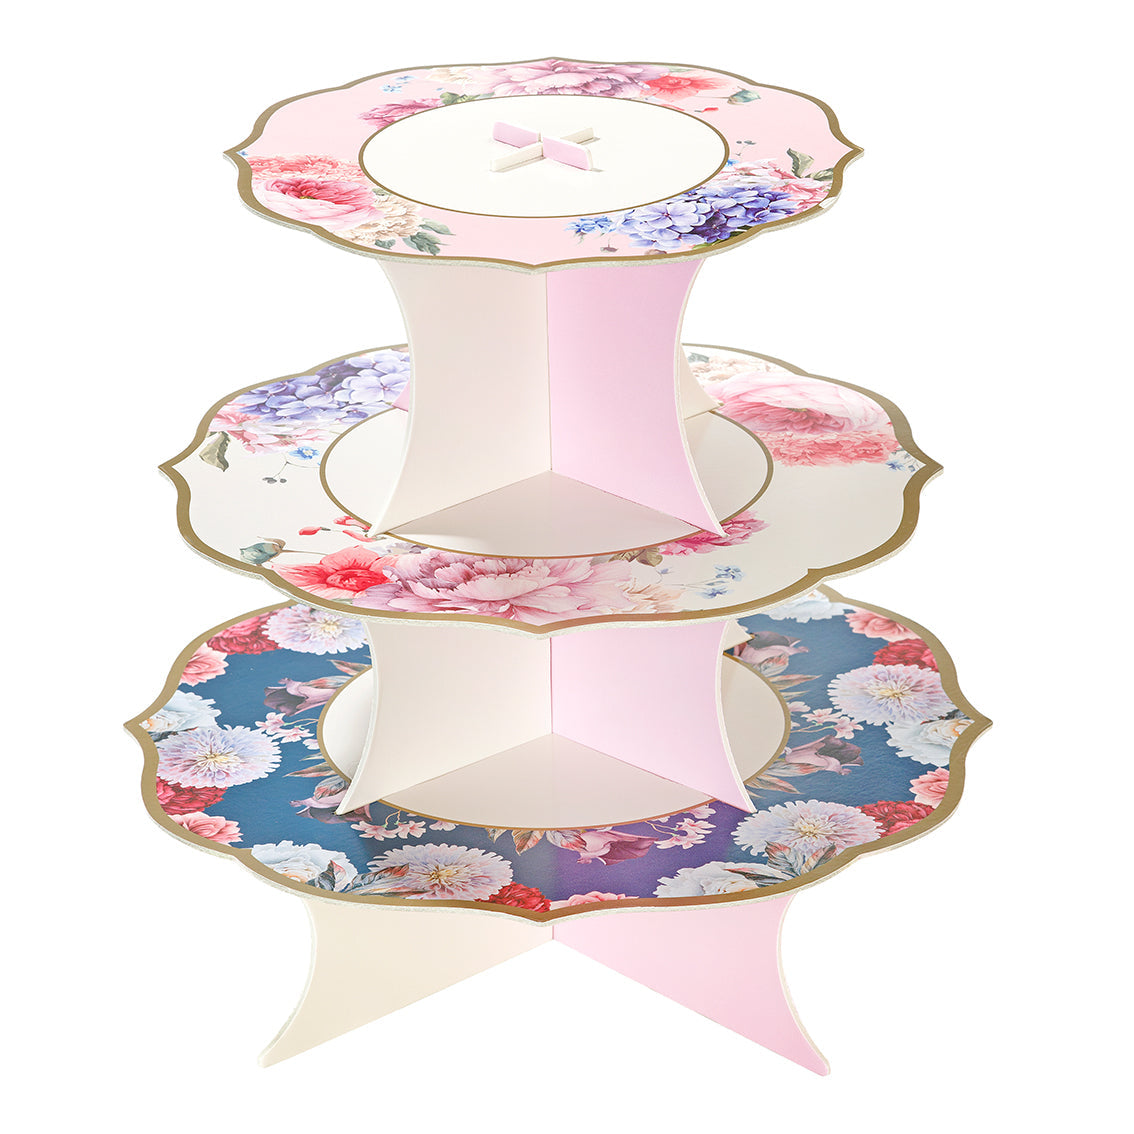 Truly Scrumptious 3 Tier Cake Stand table decoration